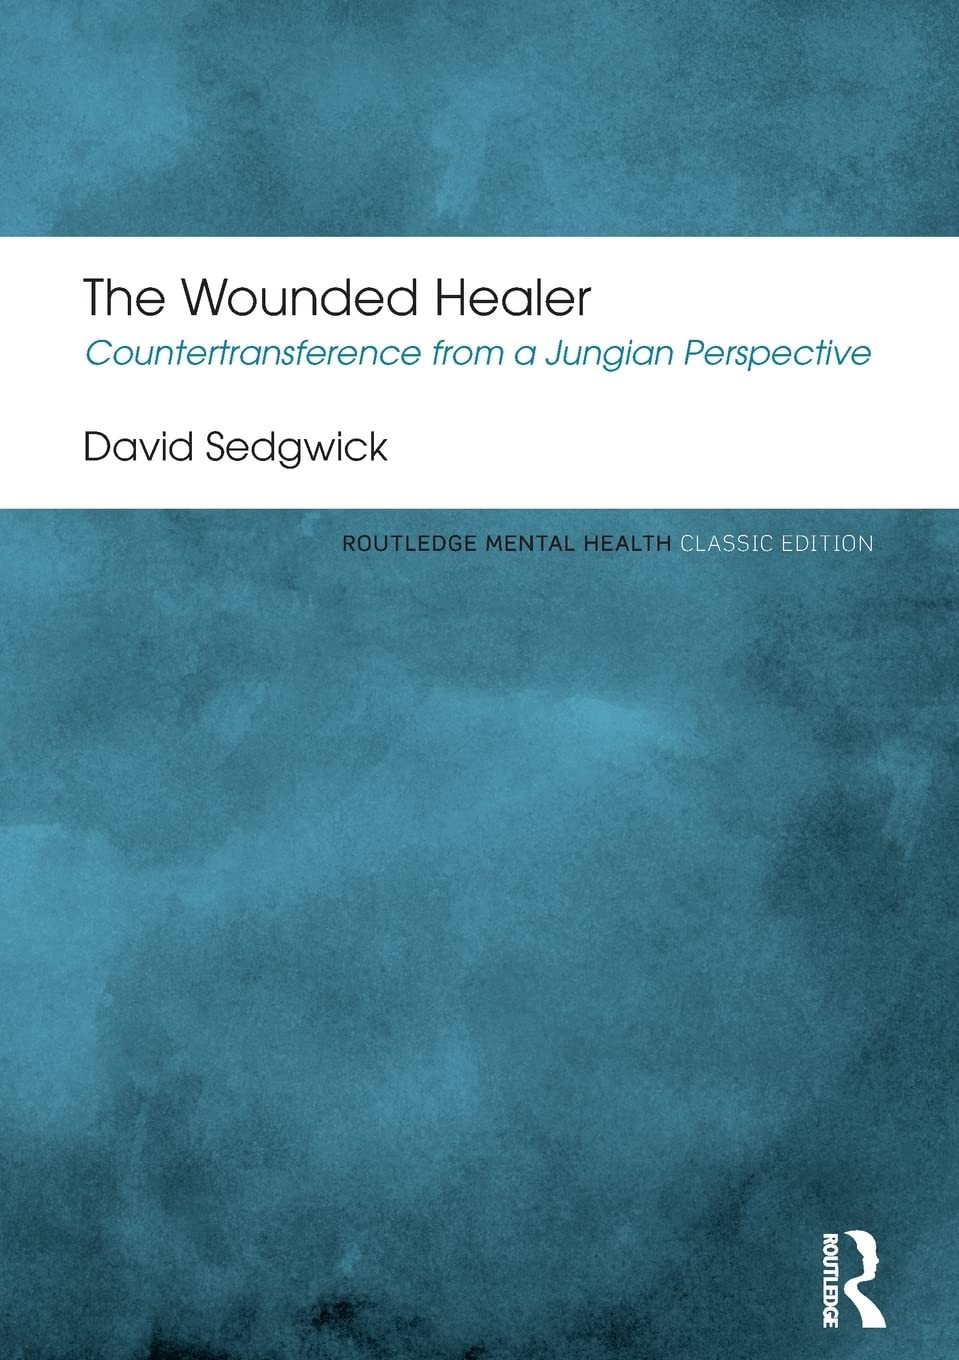 The Wounded Healer: Countertransference From a Jungian Perspective